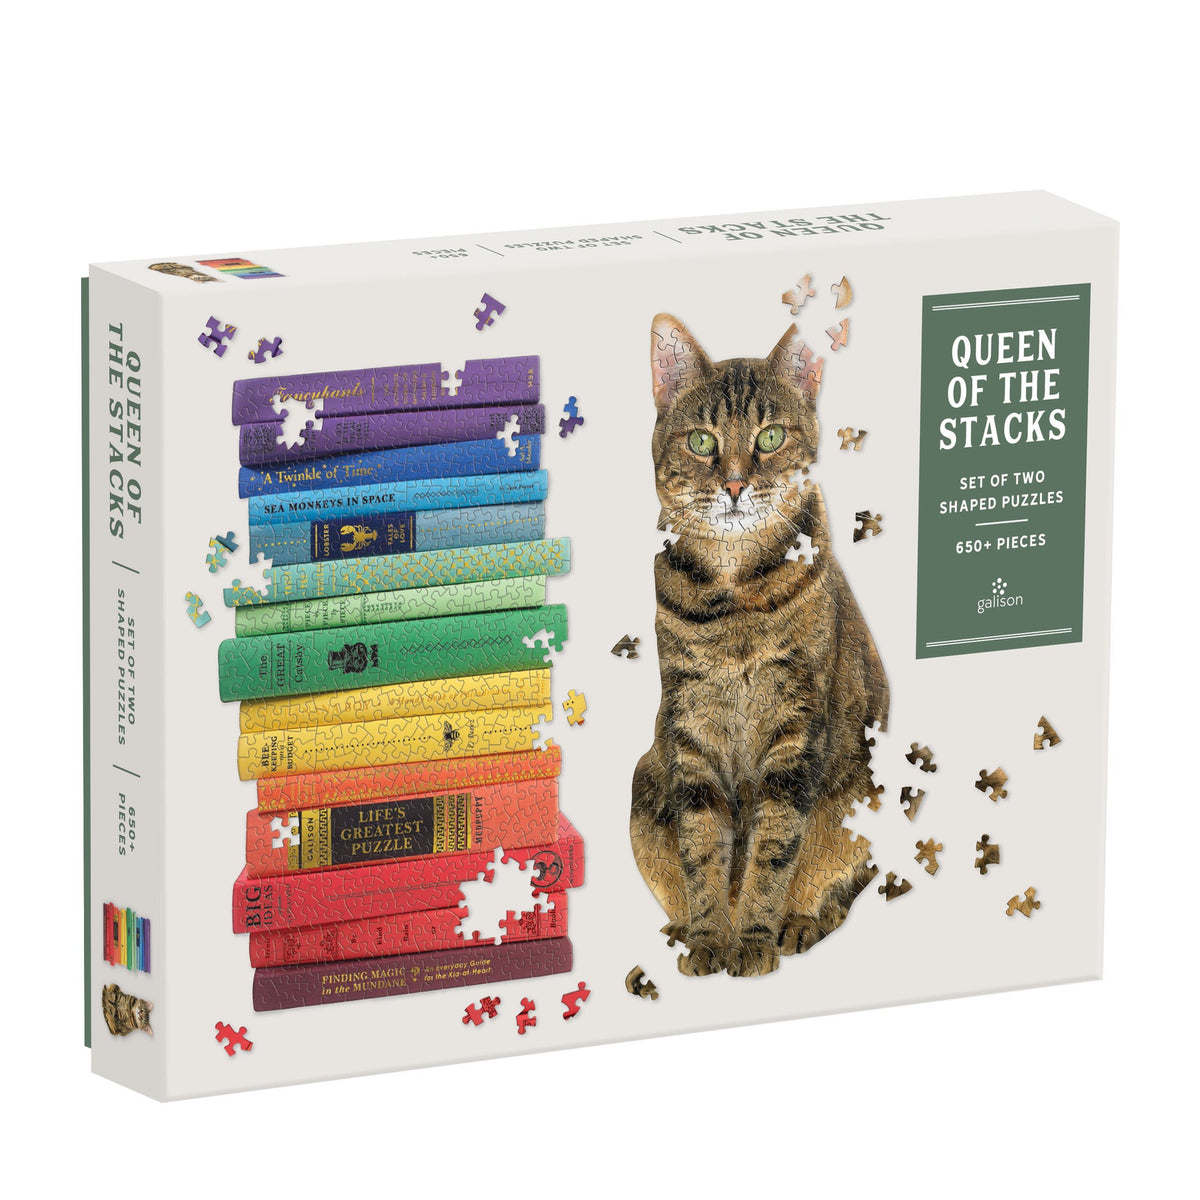 Queen of the Stacks Set of Two Puzzle Set Shaped Puzzles Galison 